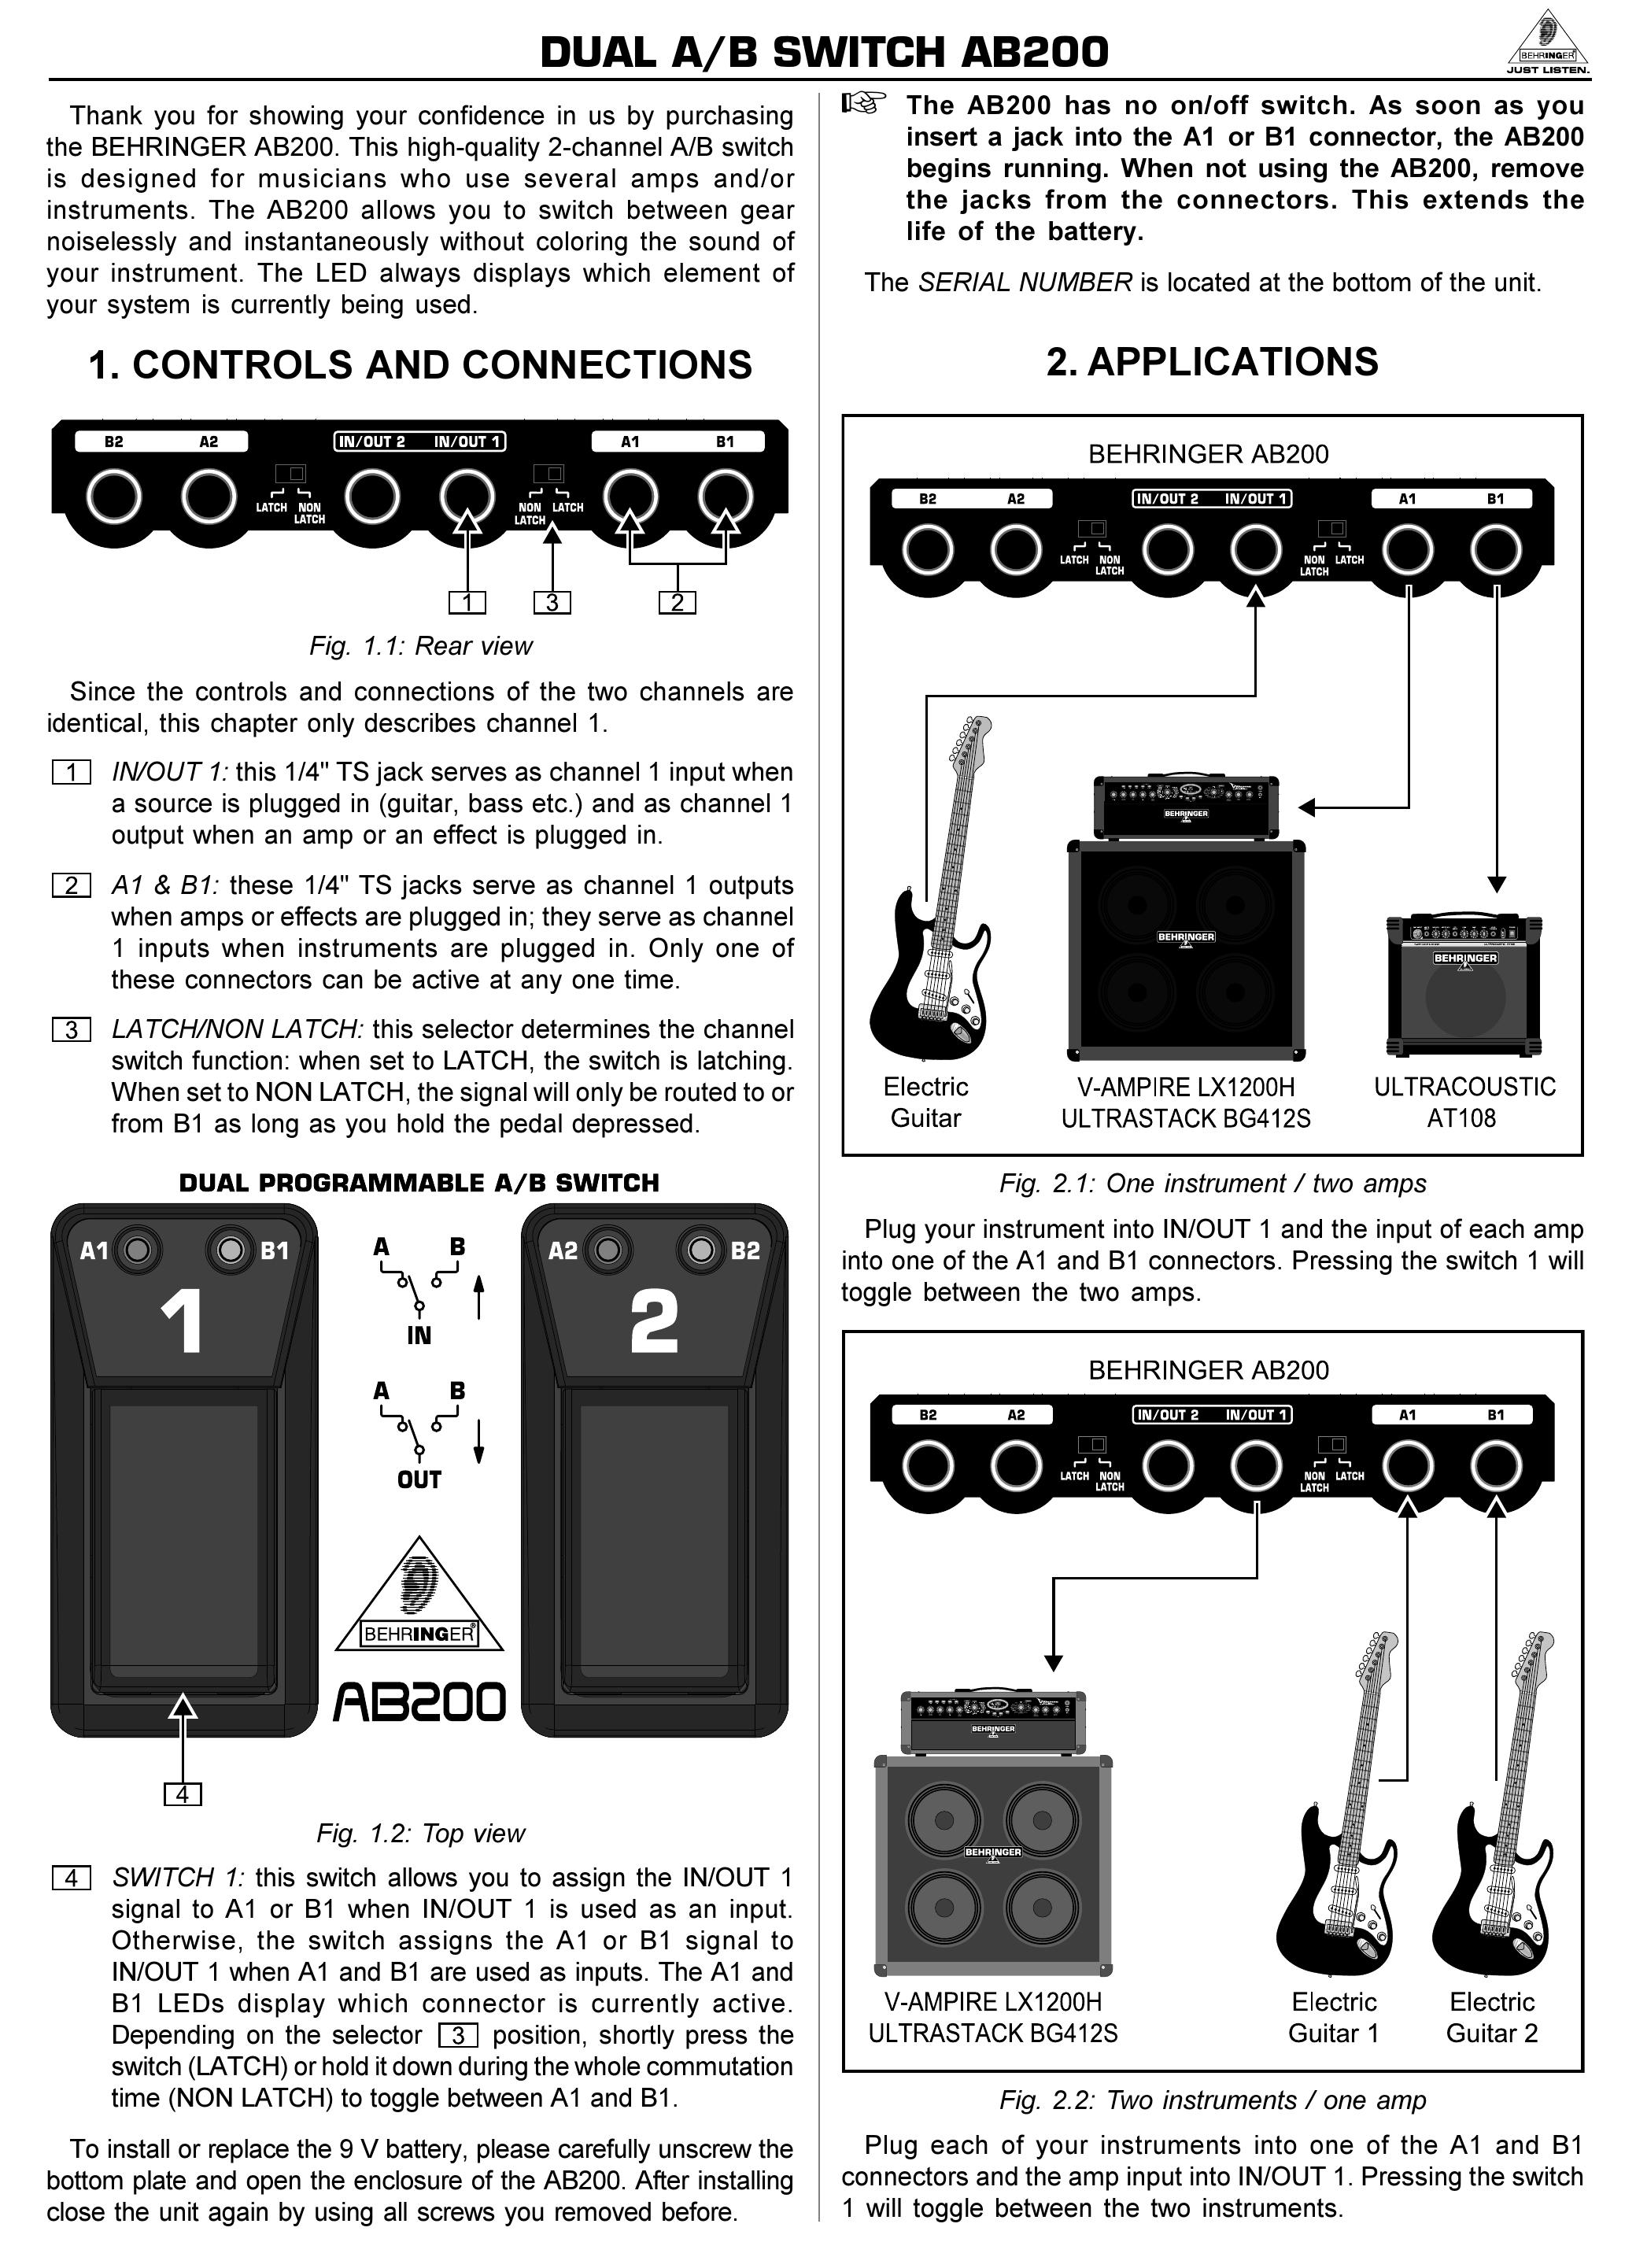 Behringer AB200 Music Pedal User Manual (Page 1)